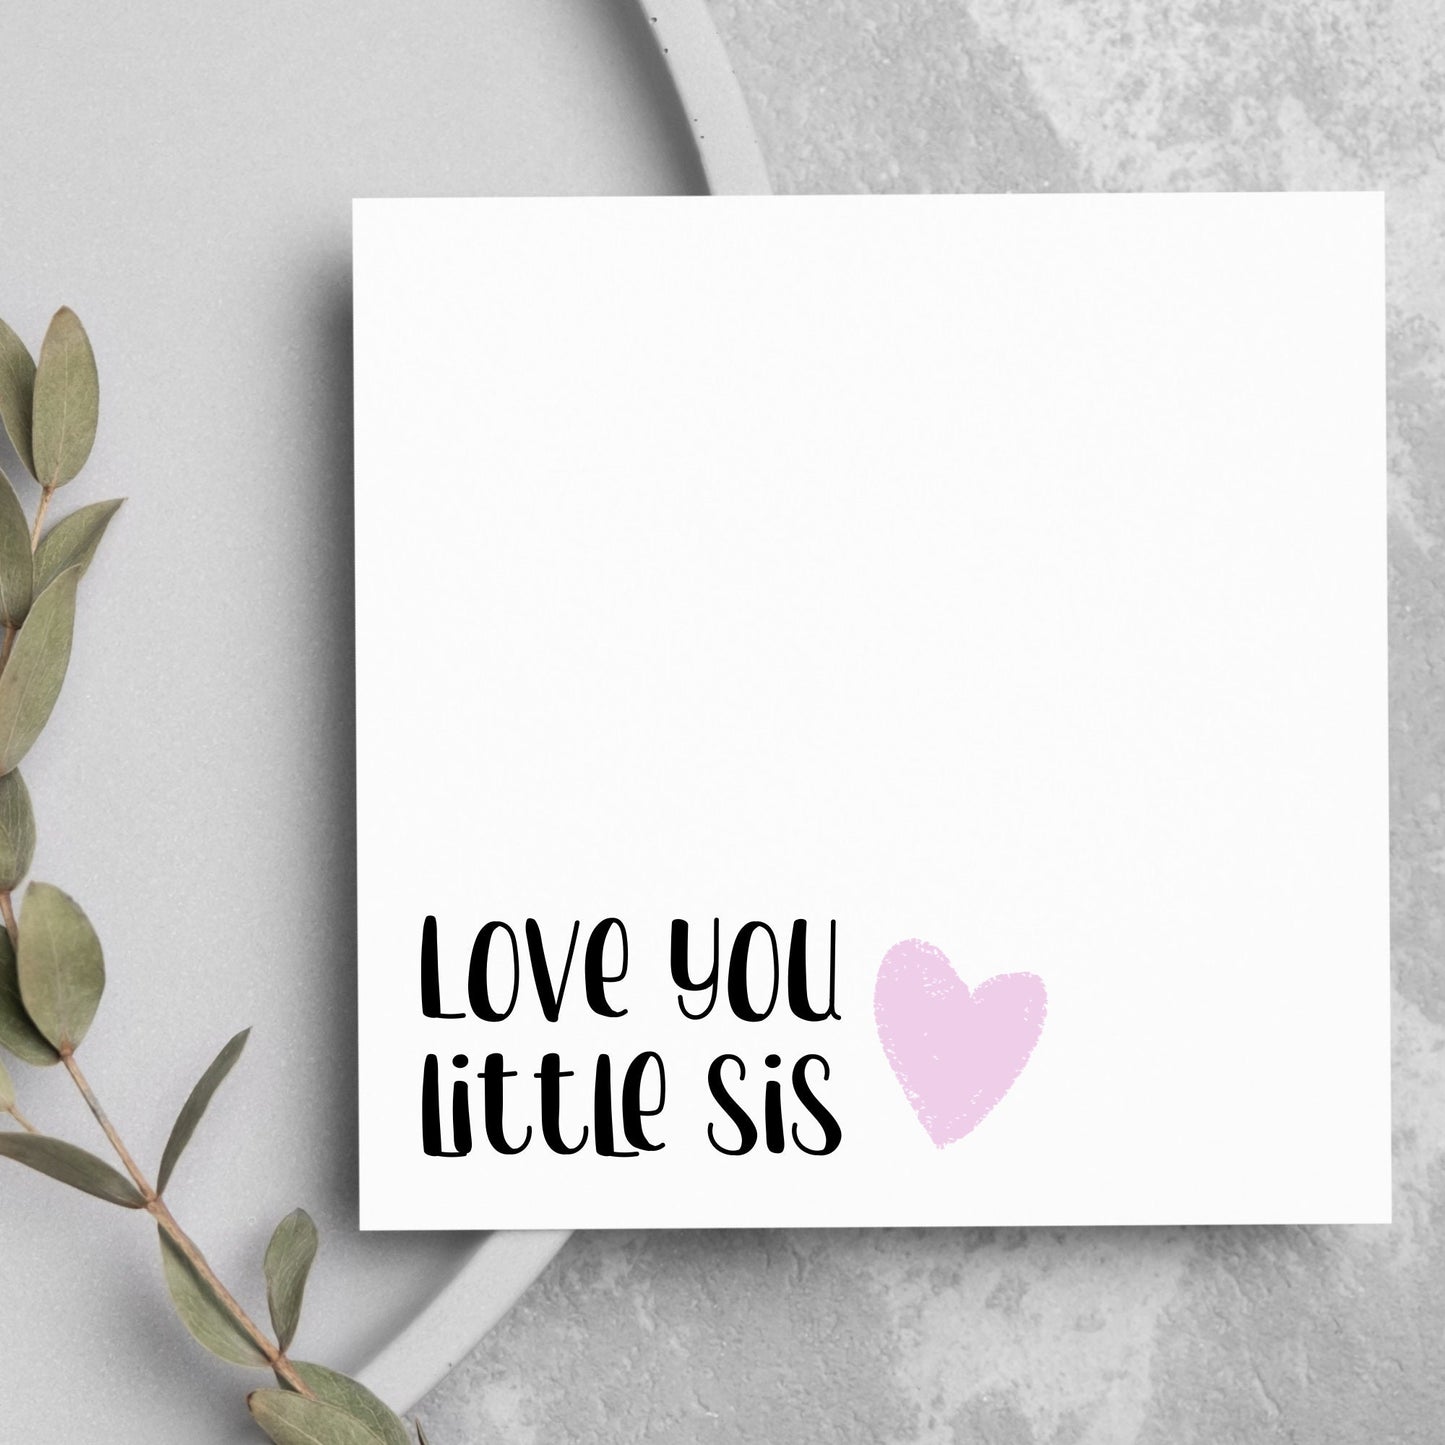 Love you little sis card, little sister birthday card, step or half sister bday card, miss you lil sis,thank you sister,cheer up sister card